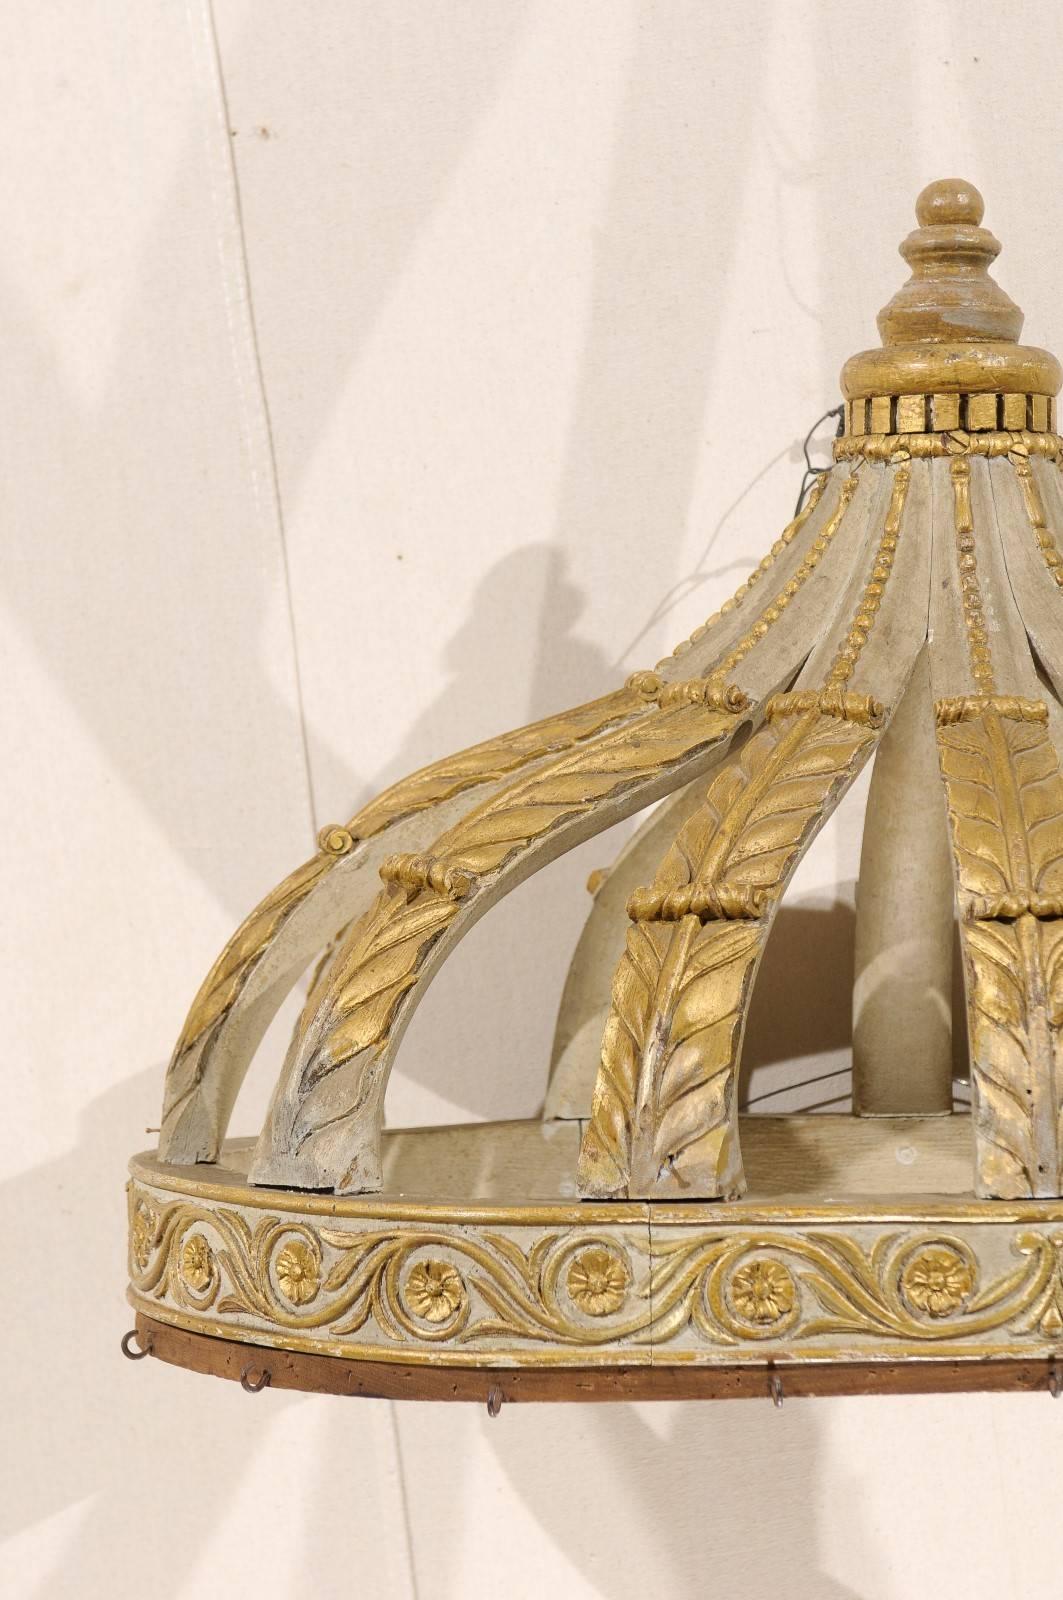 20th Century Italian Bed Corona or Bed Crown with Gilt Accents and Carved Rinceaux Frieze